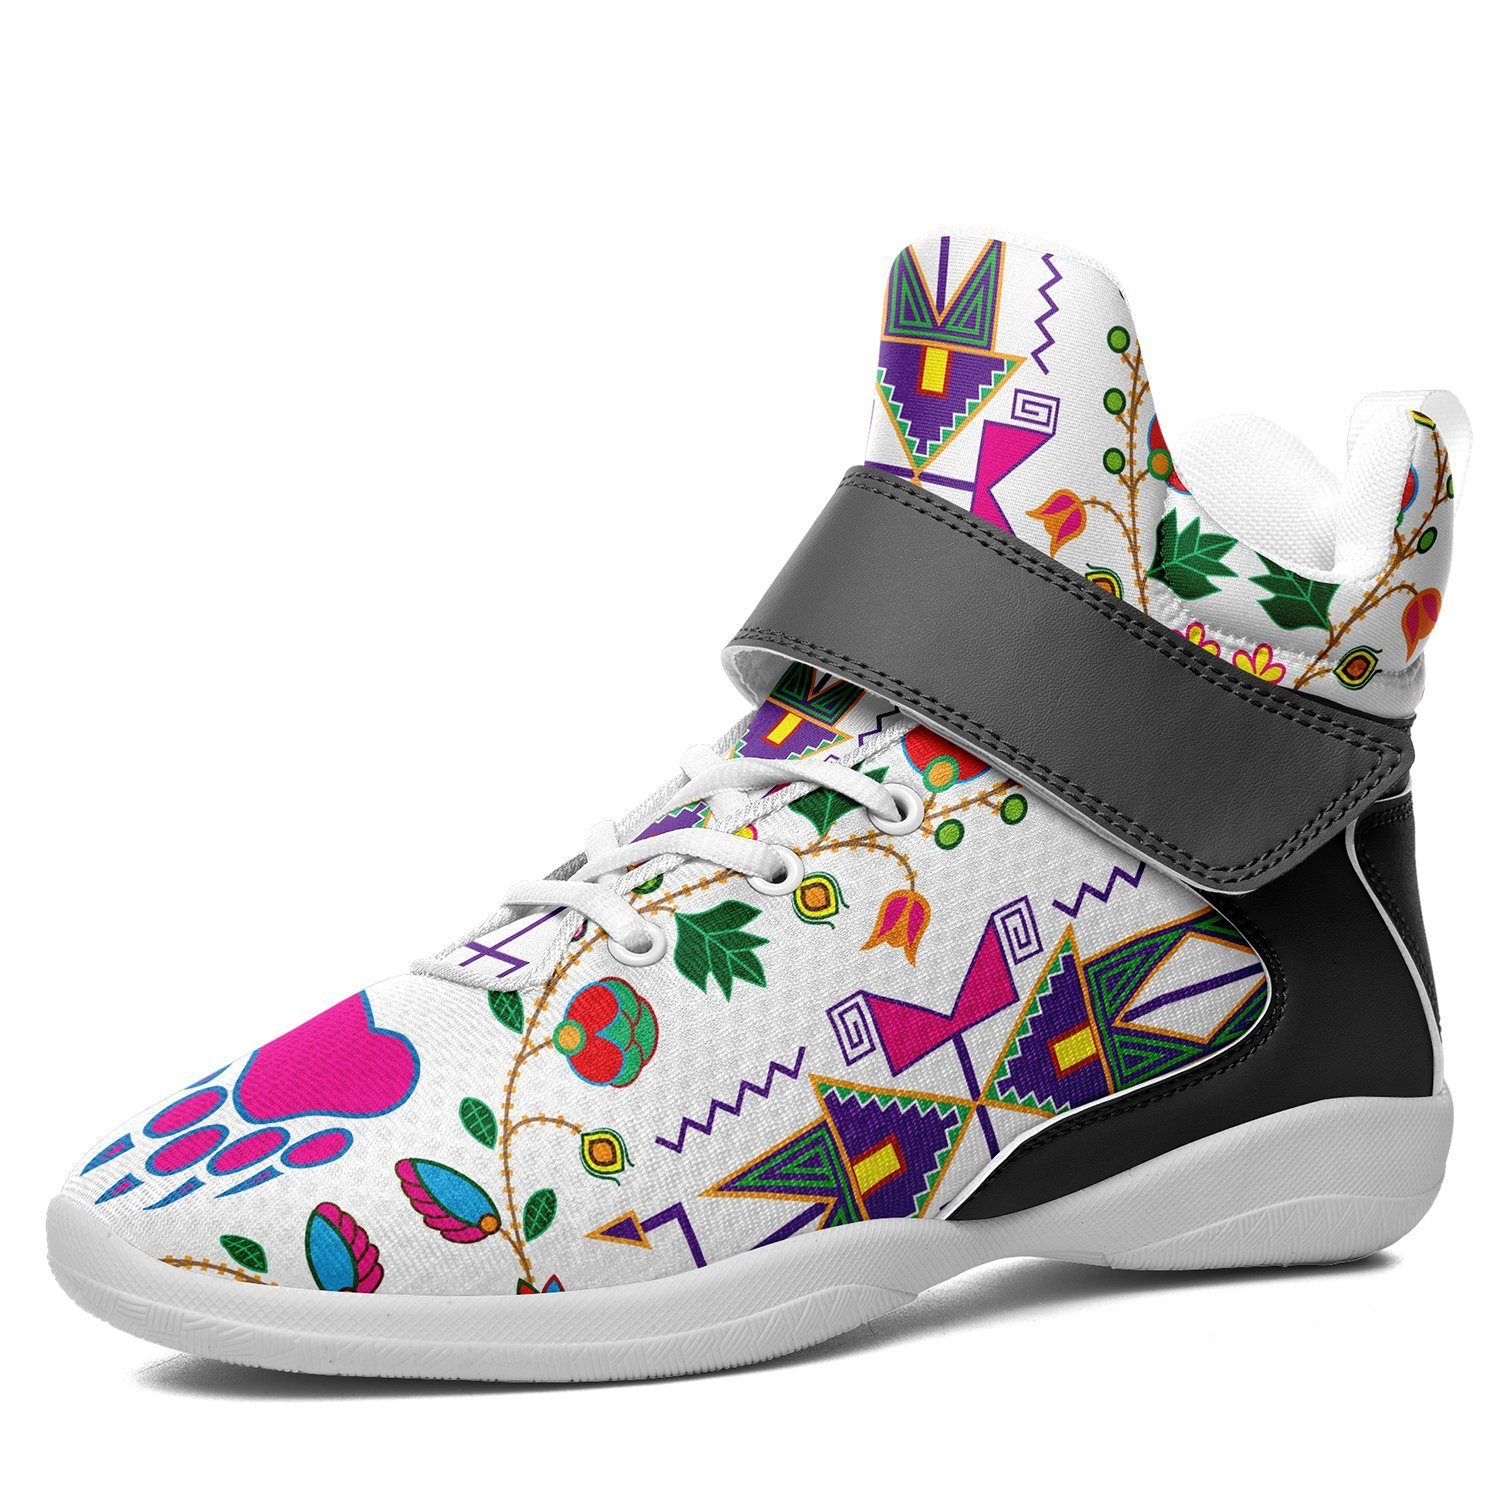 Geometric Floral Fall White Ipottaa Basketball / Sport High Top Shoes - White Sole 49 Dzine US Men 7 / EUR 40 White Sole with Gray Strap 